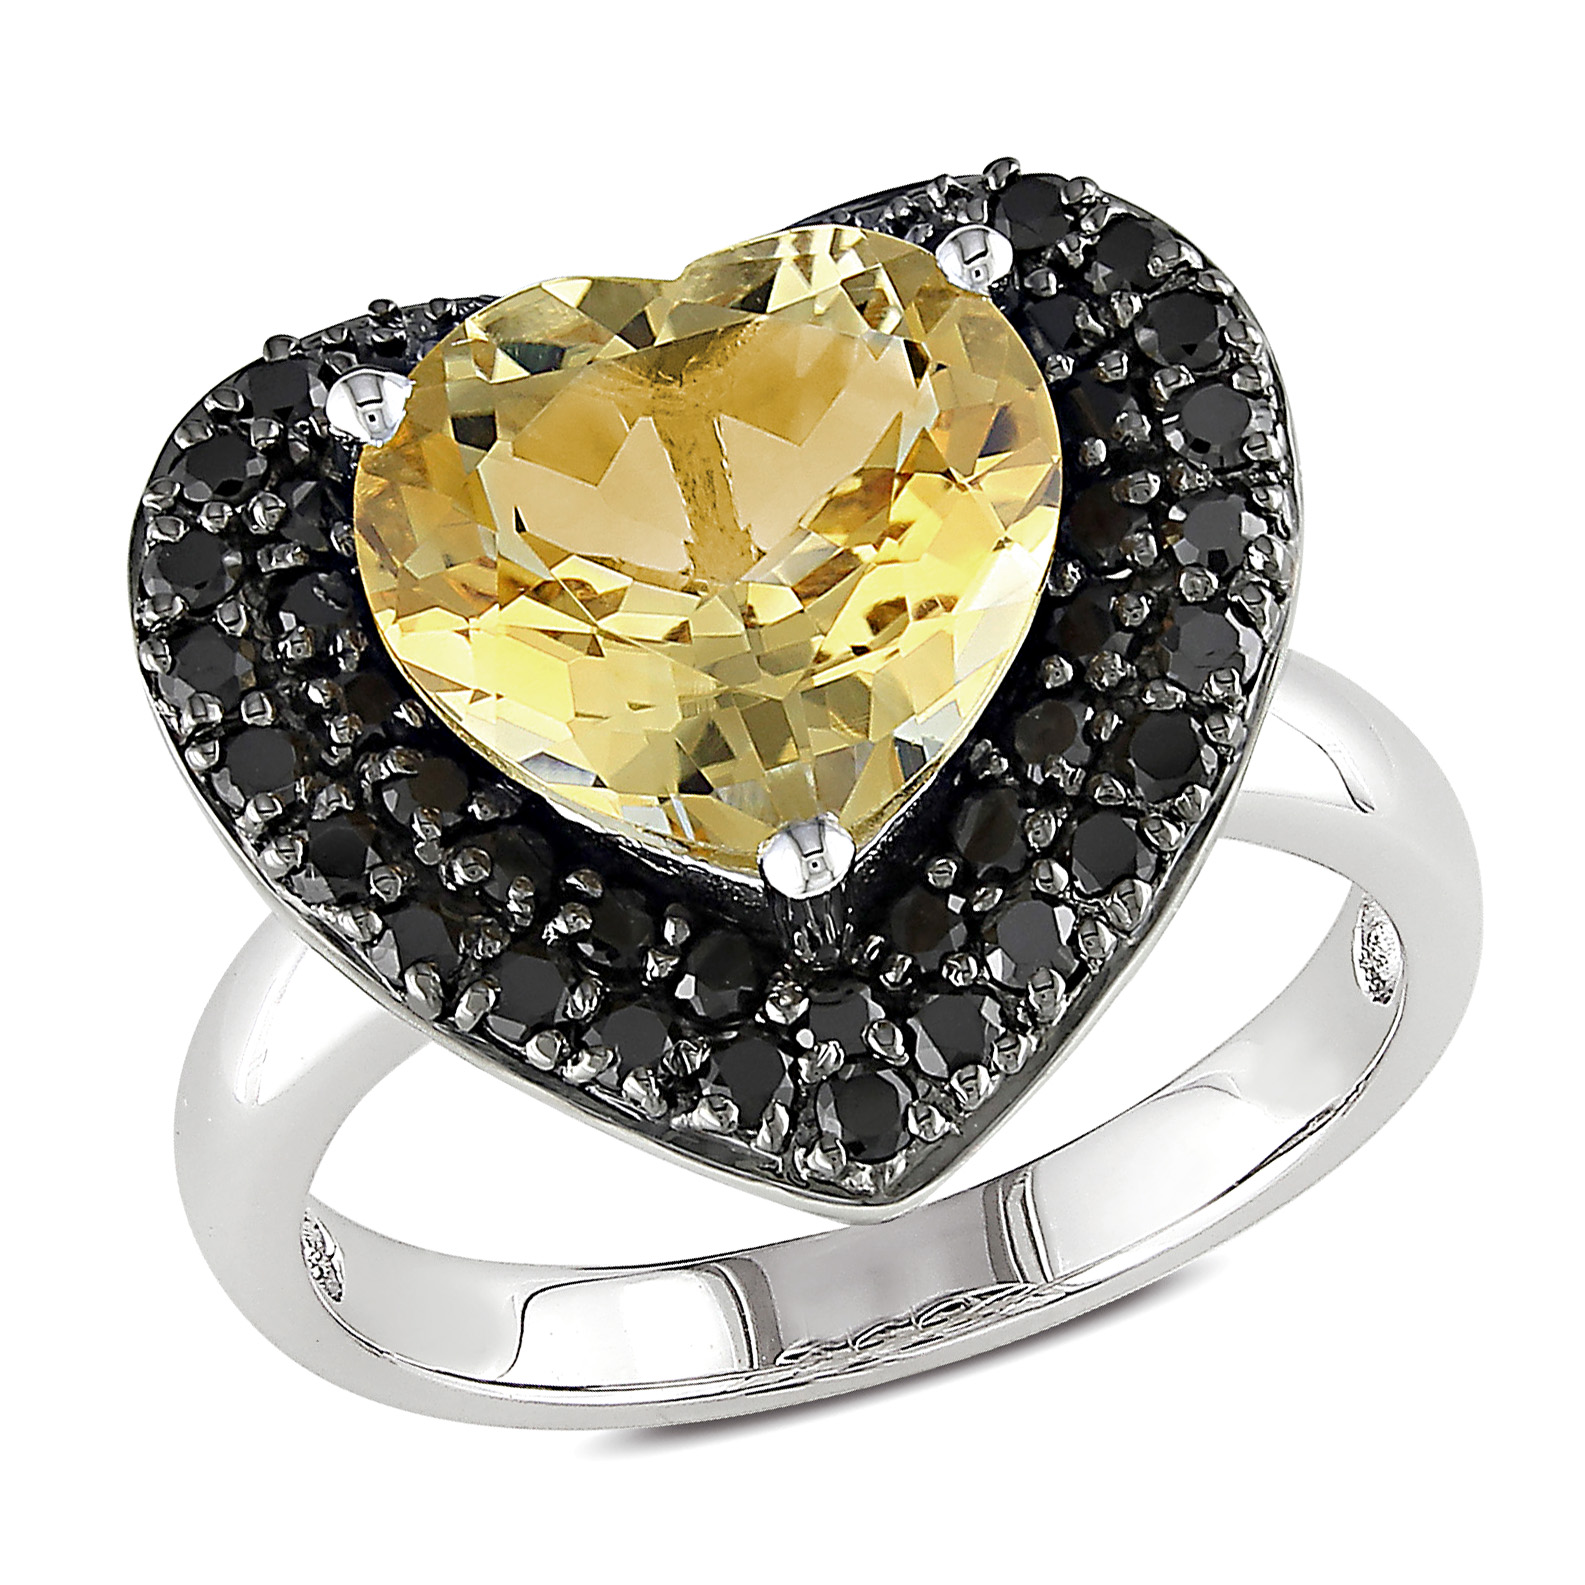 Amour 4 1/3 Carat T.G.W. Citrine Black Spinel Heart Ring in Sterling Silver Black Plated